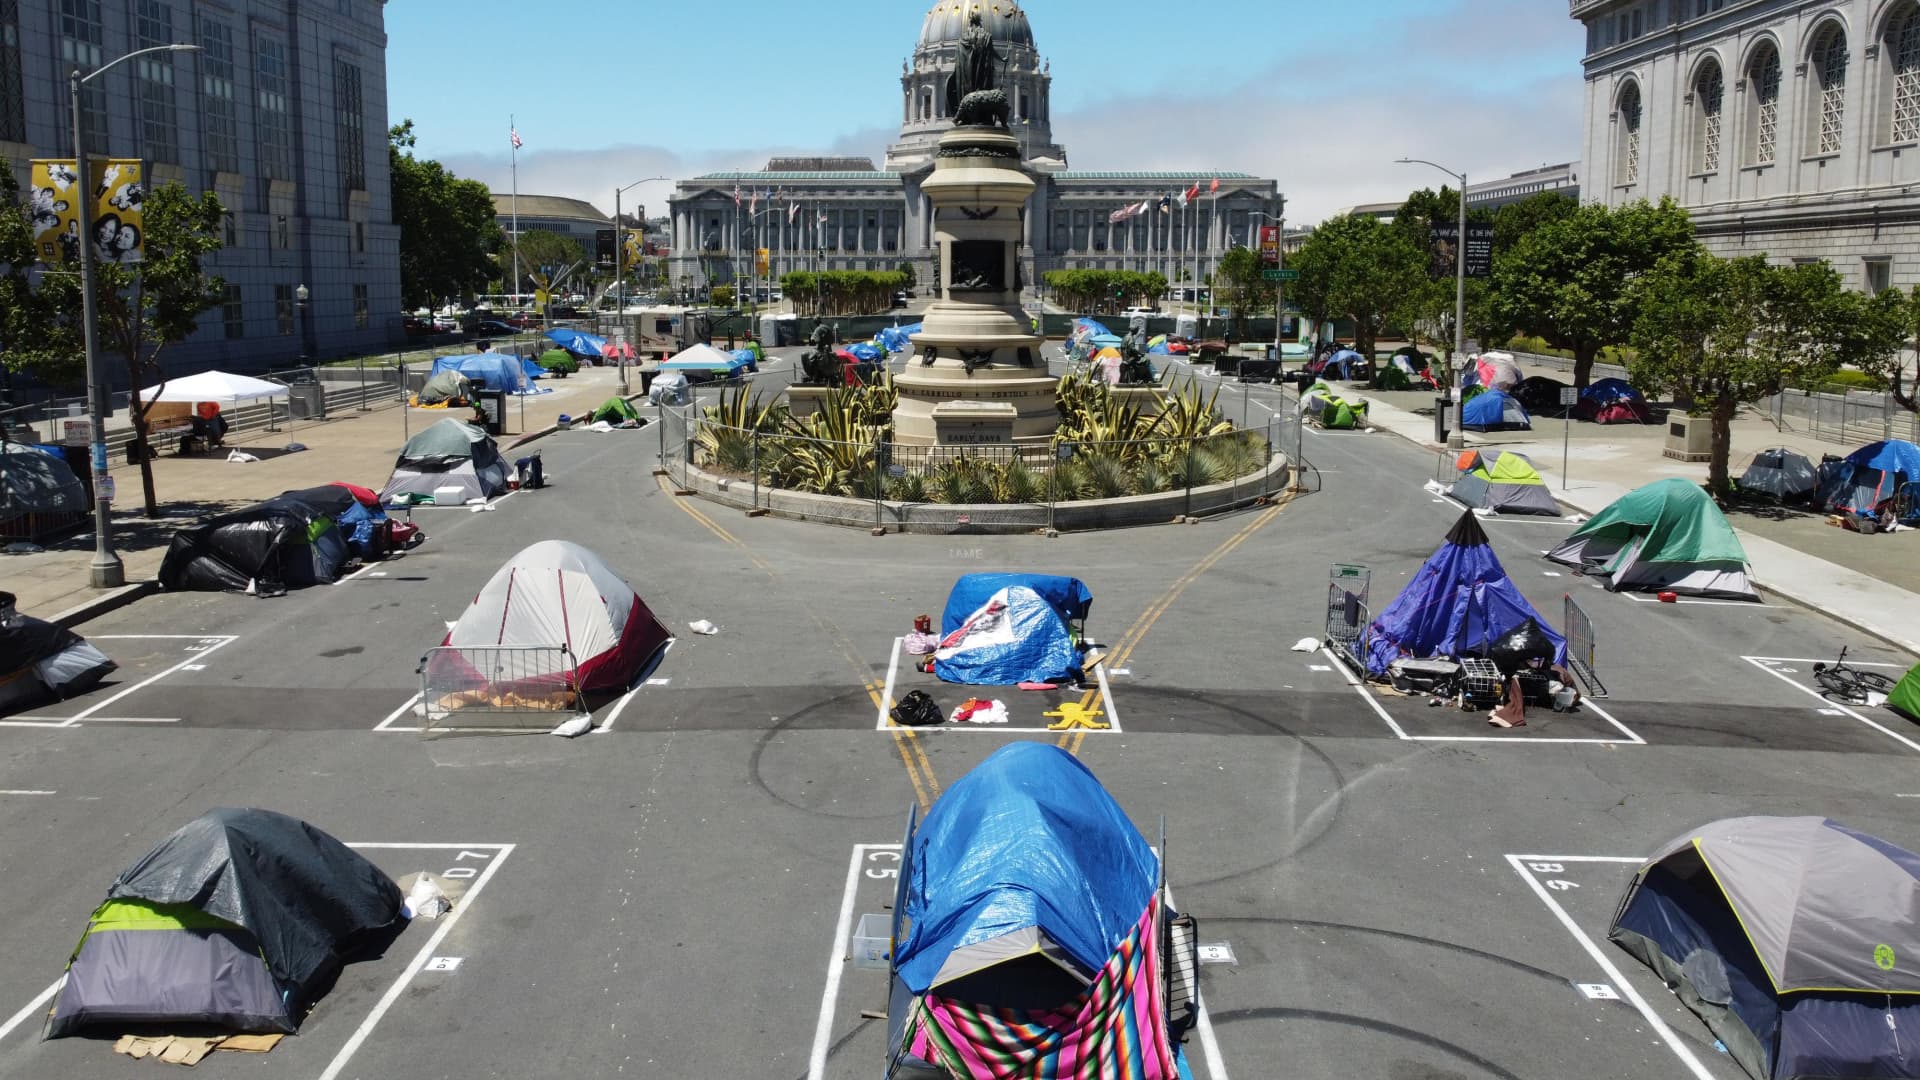 A temporary sanctioned tent encampment for the homeless across from the City Hall in San Francisco on May 28, 2020.